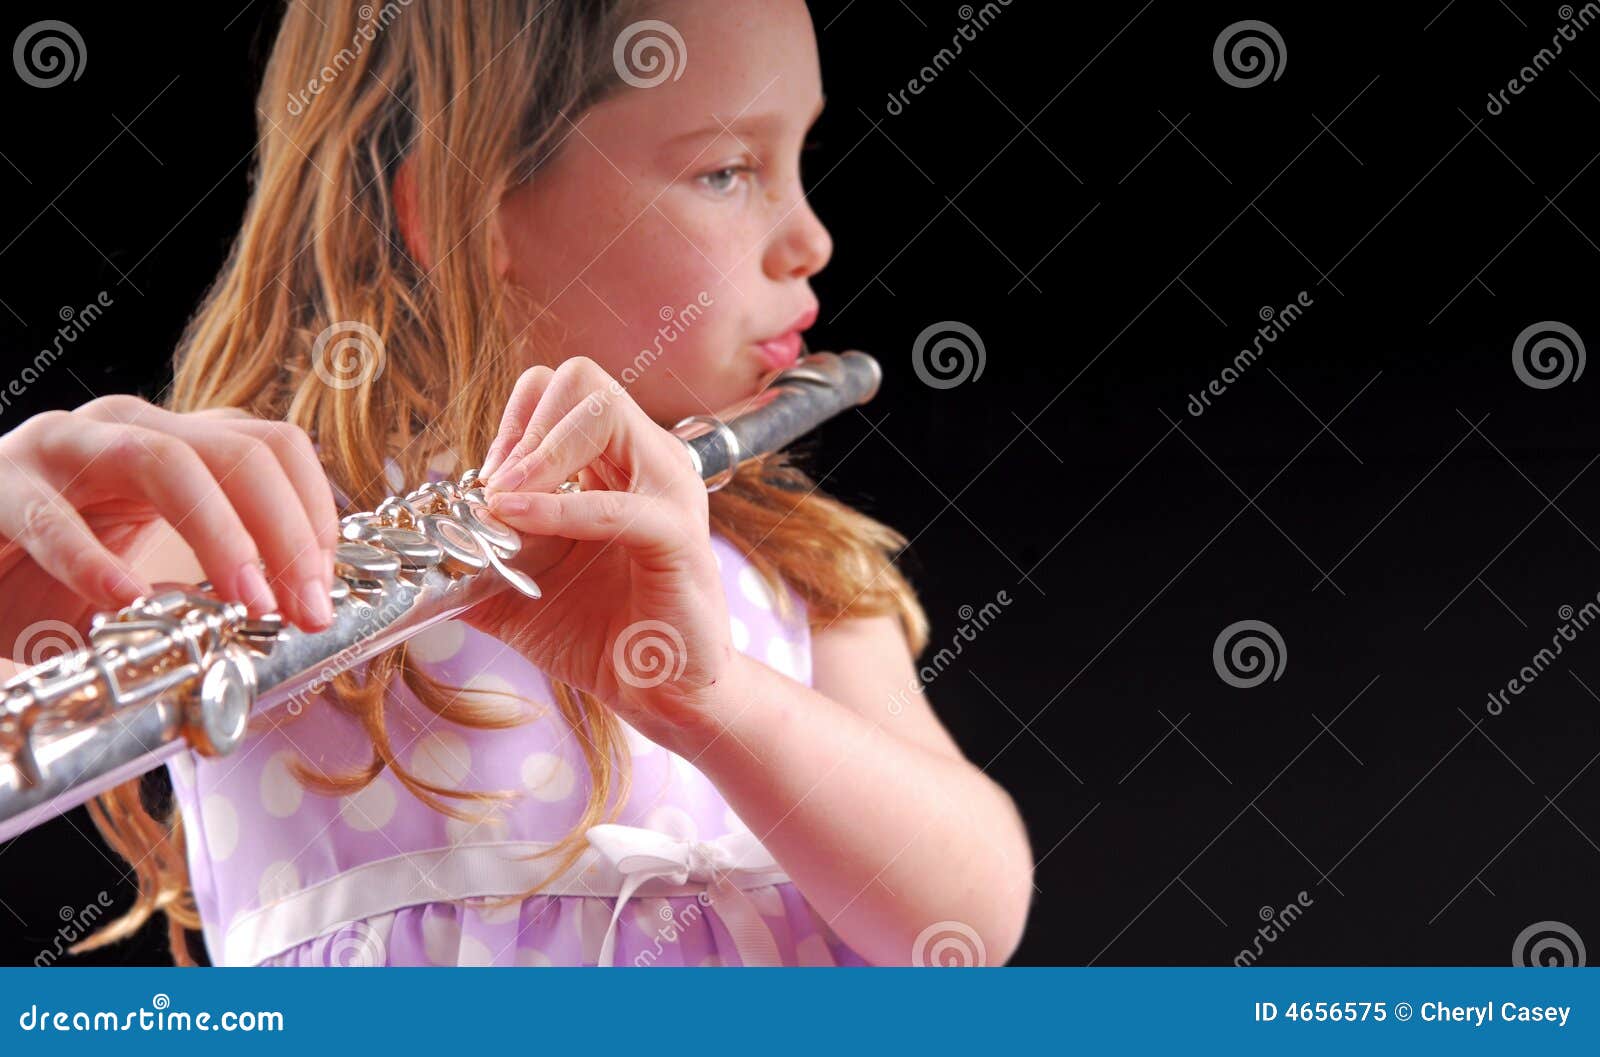 girl playing instrument